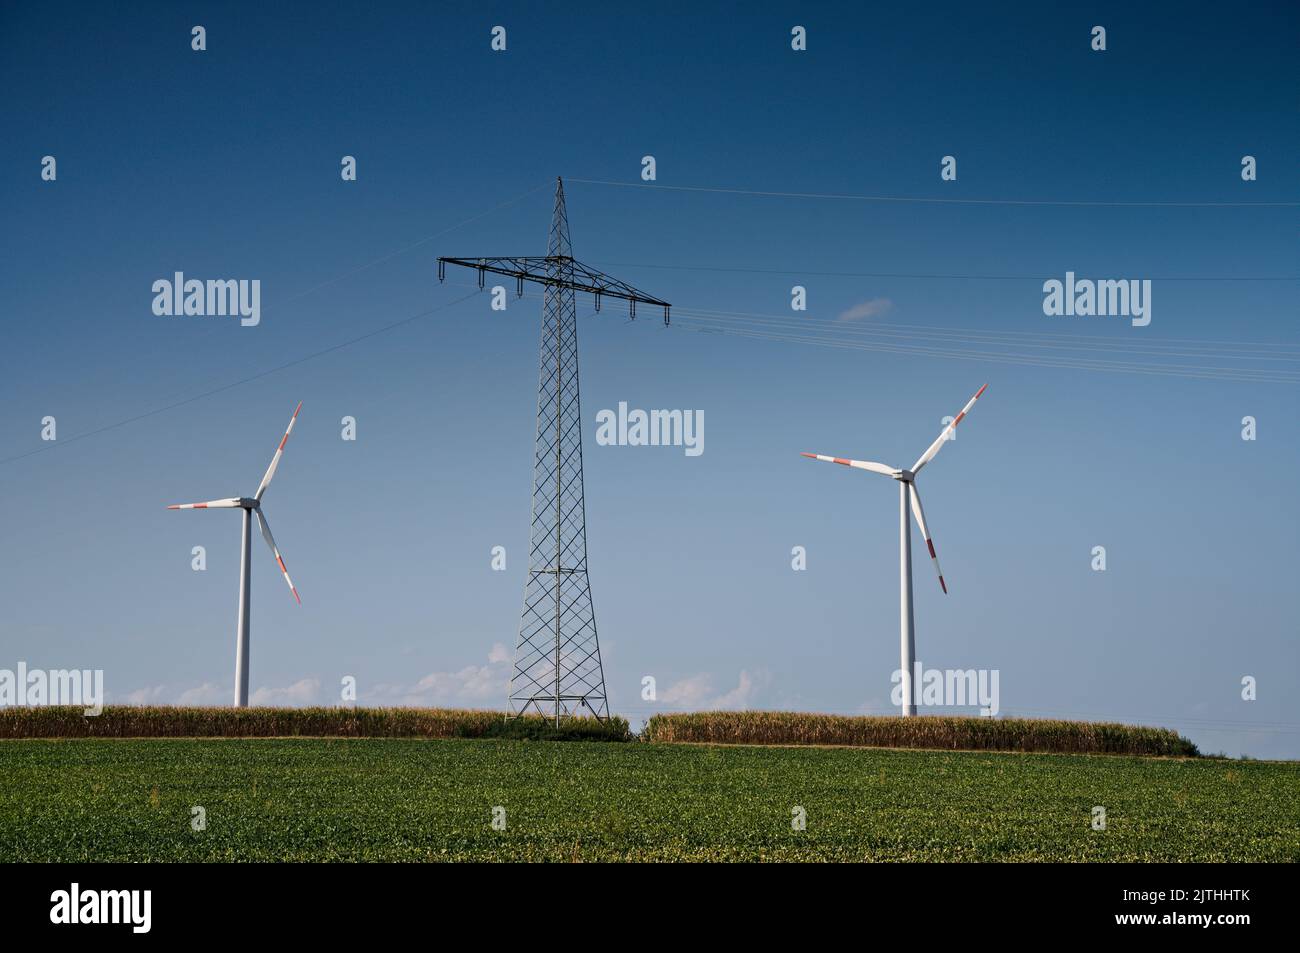 Electricity pylon and two wind turbines in rural landscape Stock Photo